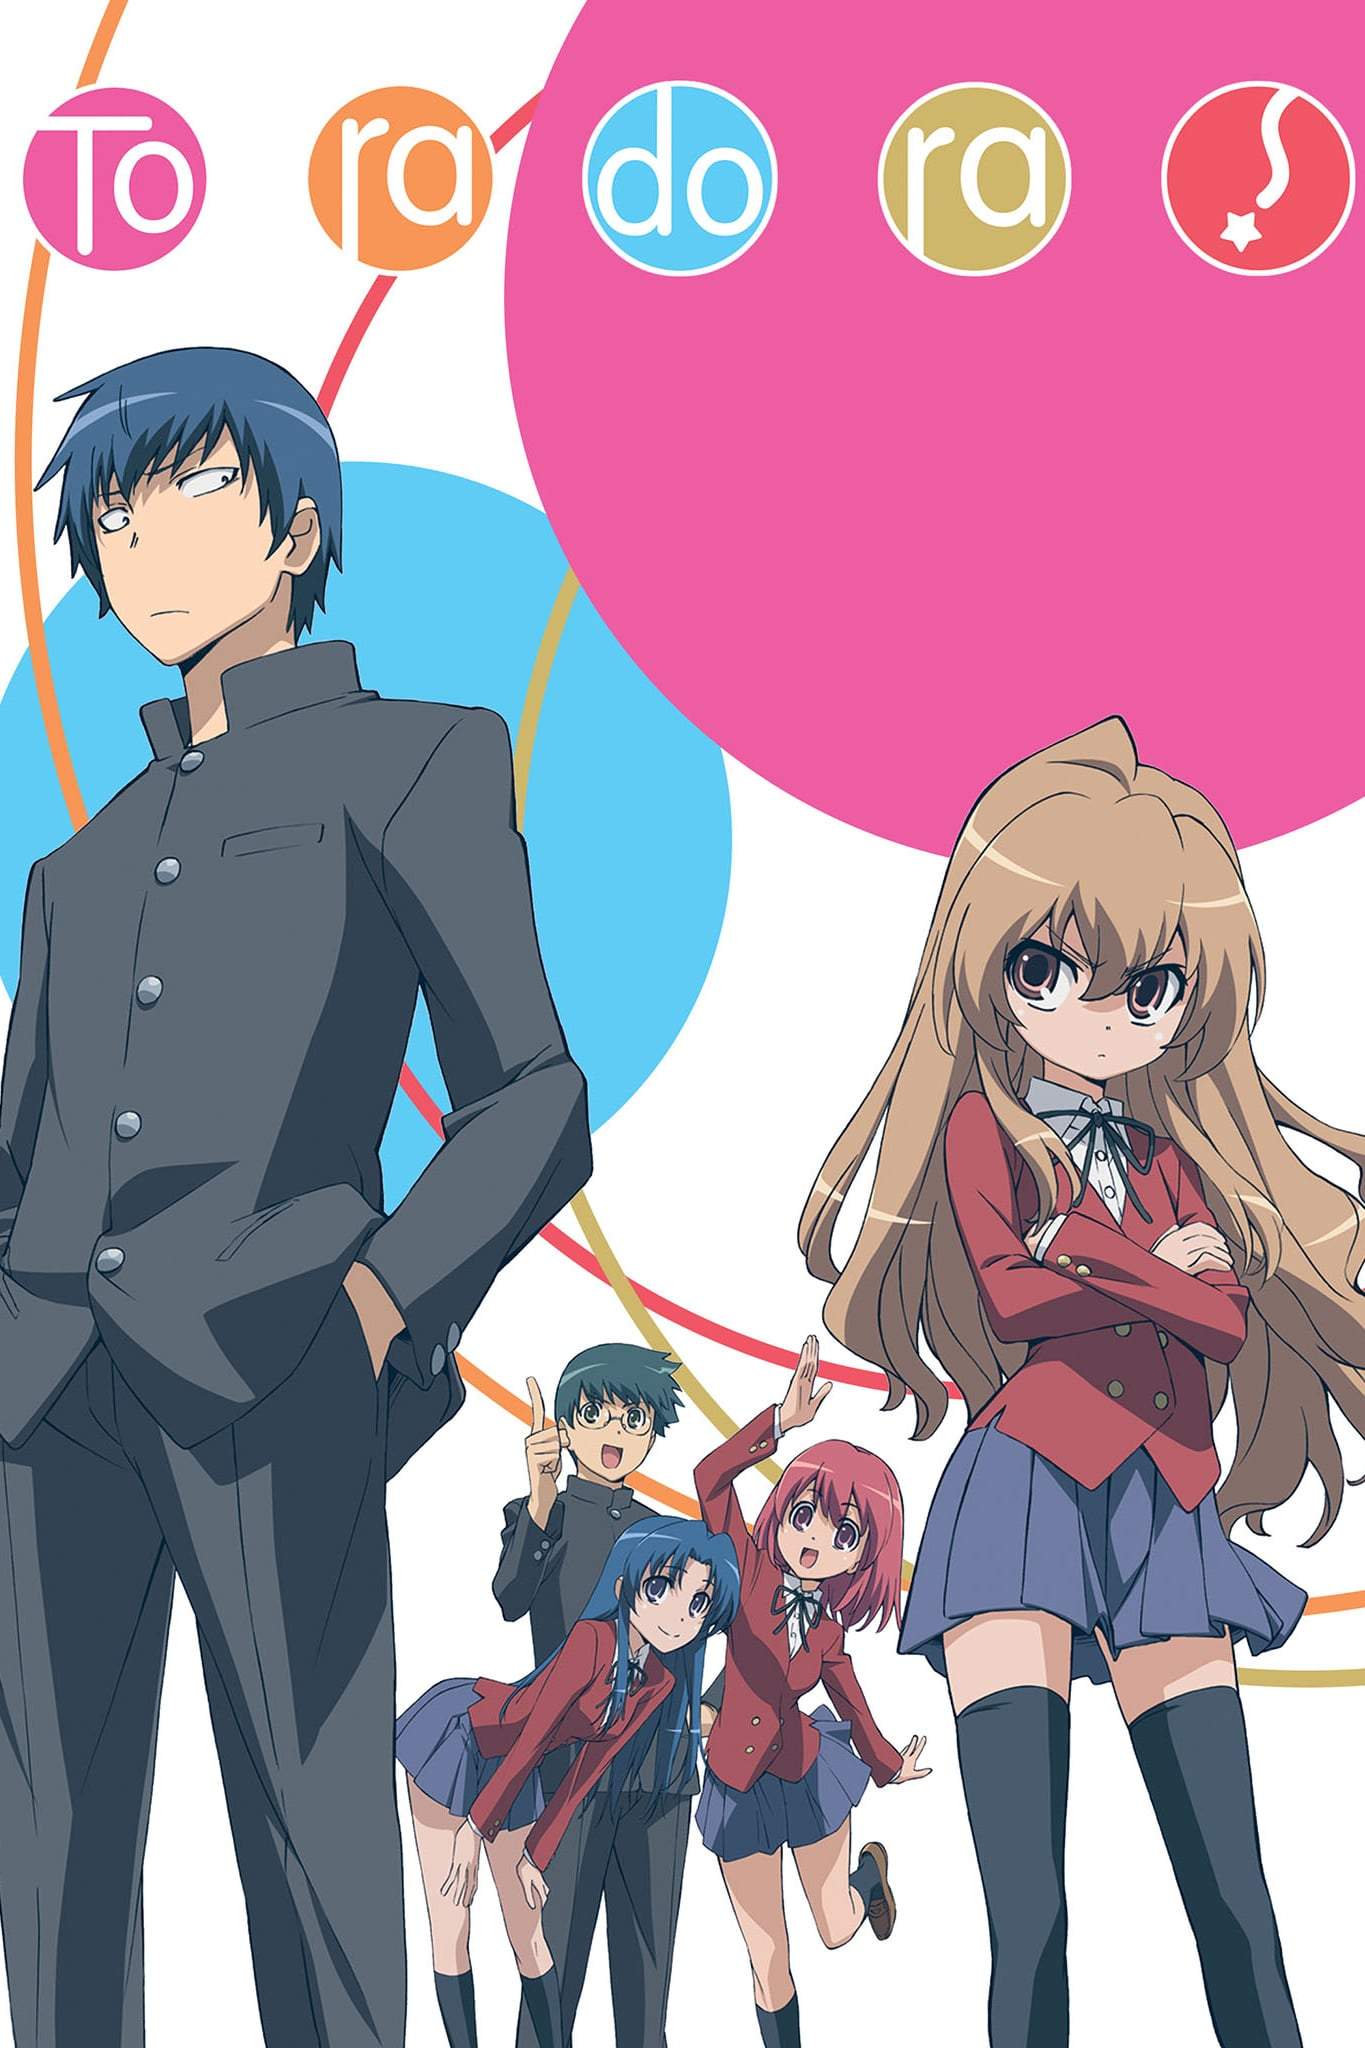 Toradora What Happens After The Ending Of Toradora - Release on